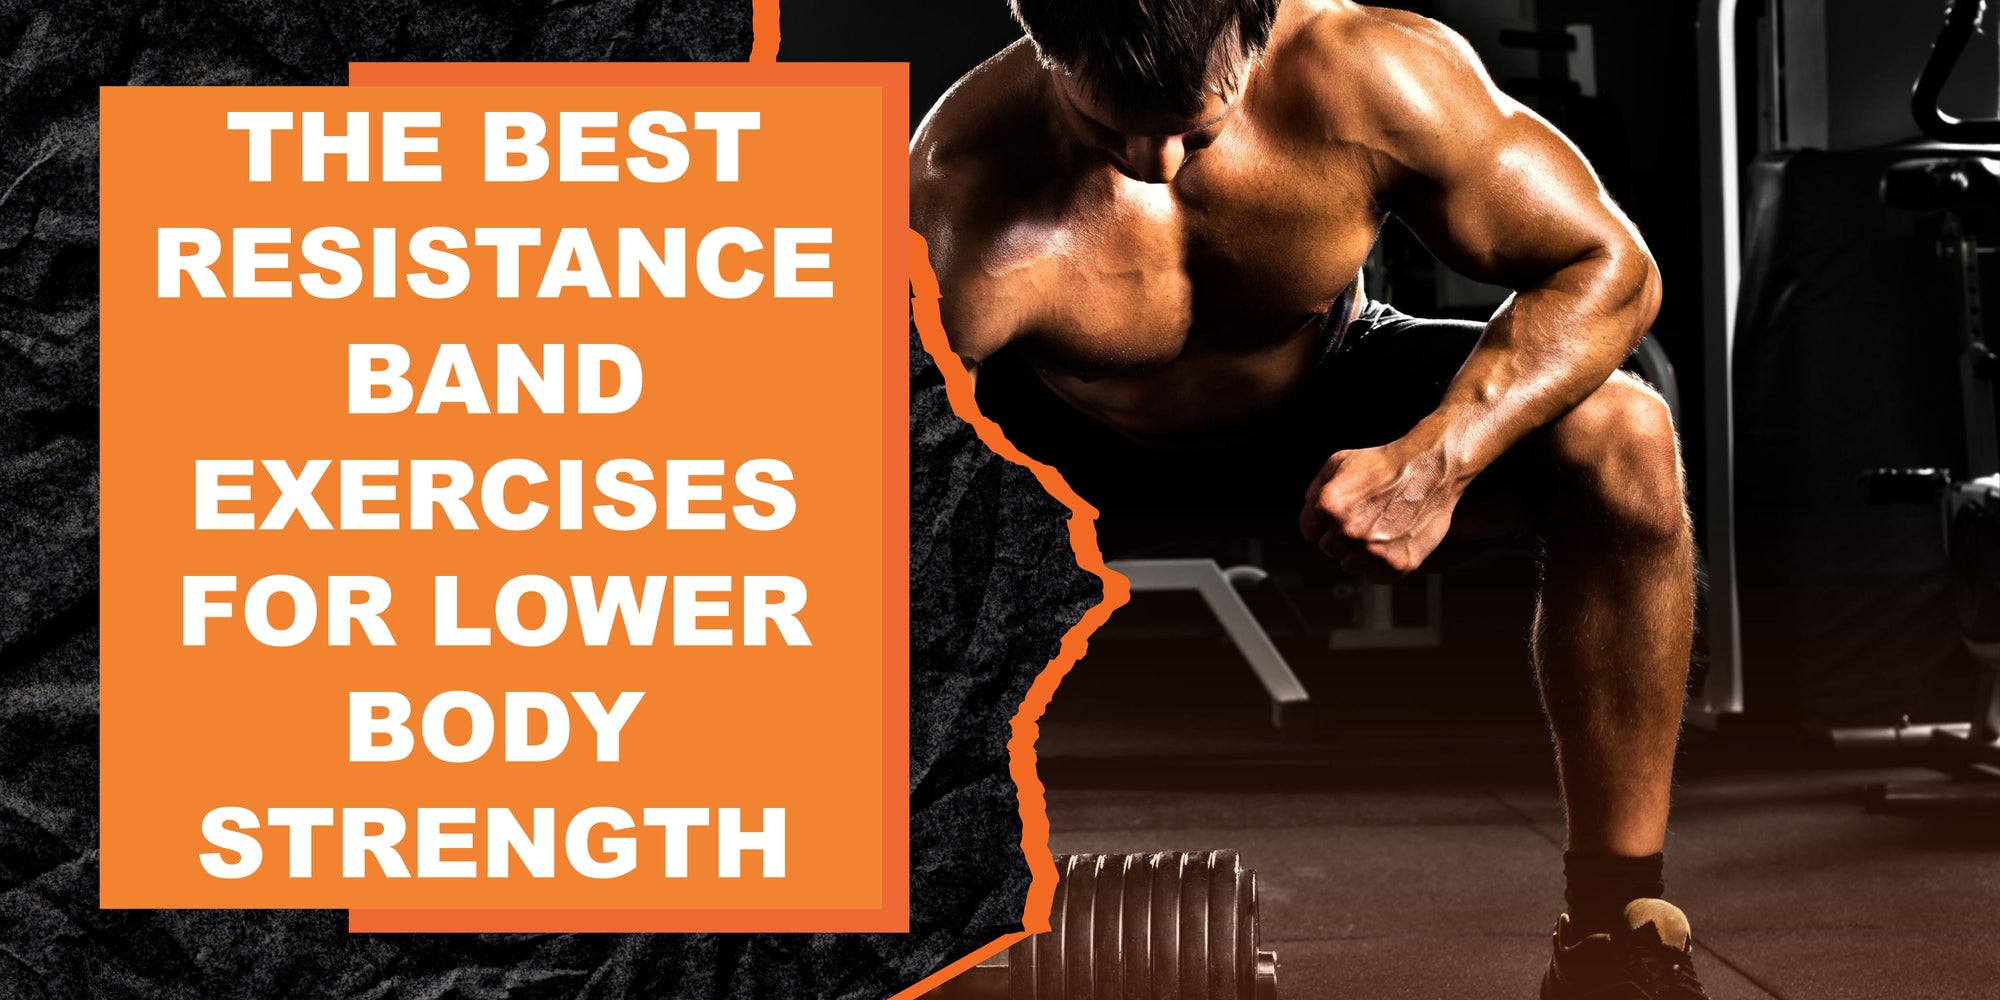 The Best Resistance Band Exercises for Lower Body Strength